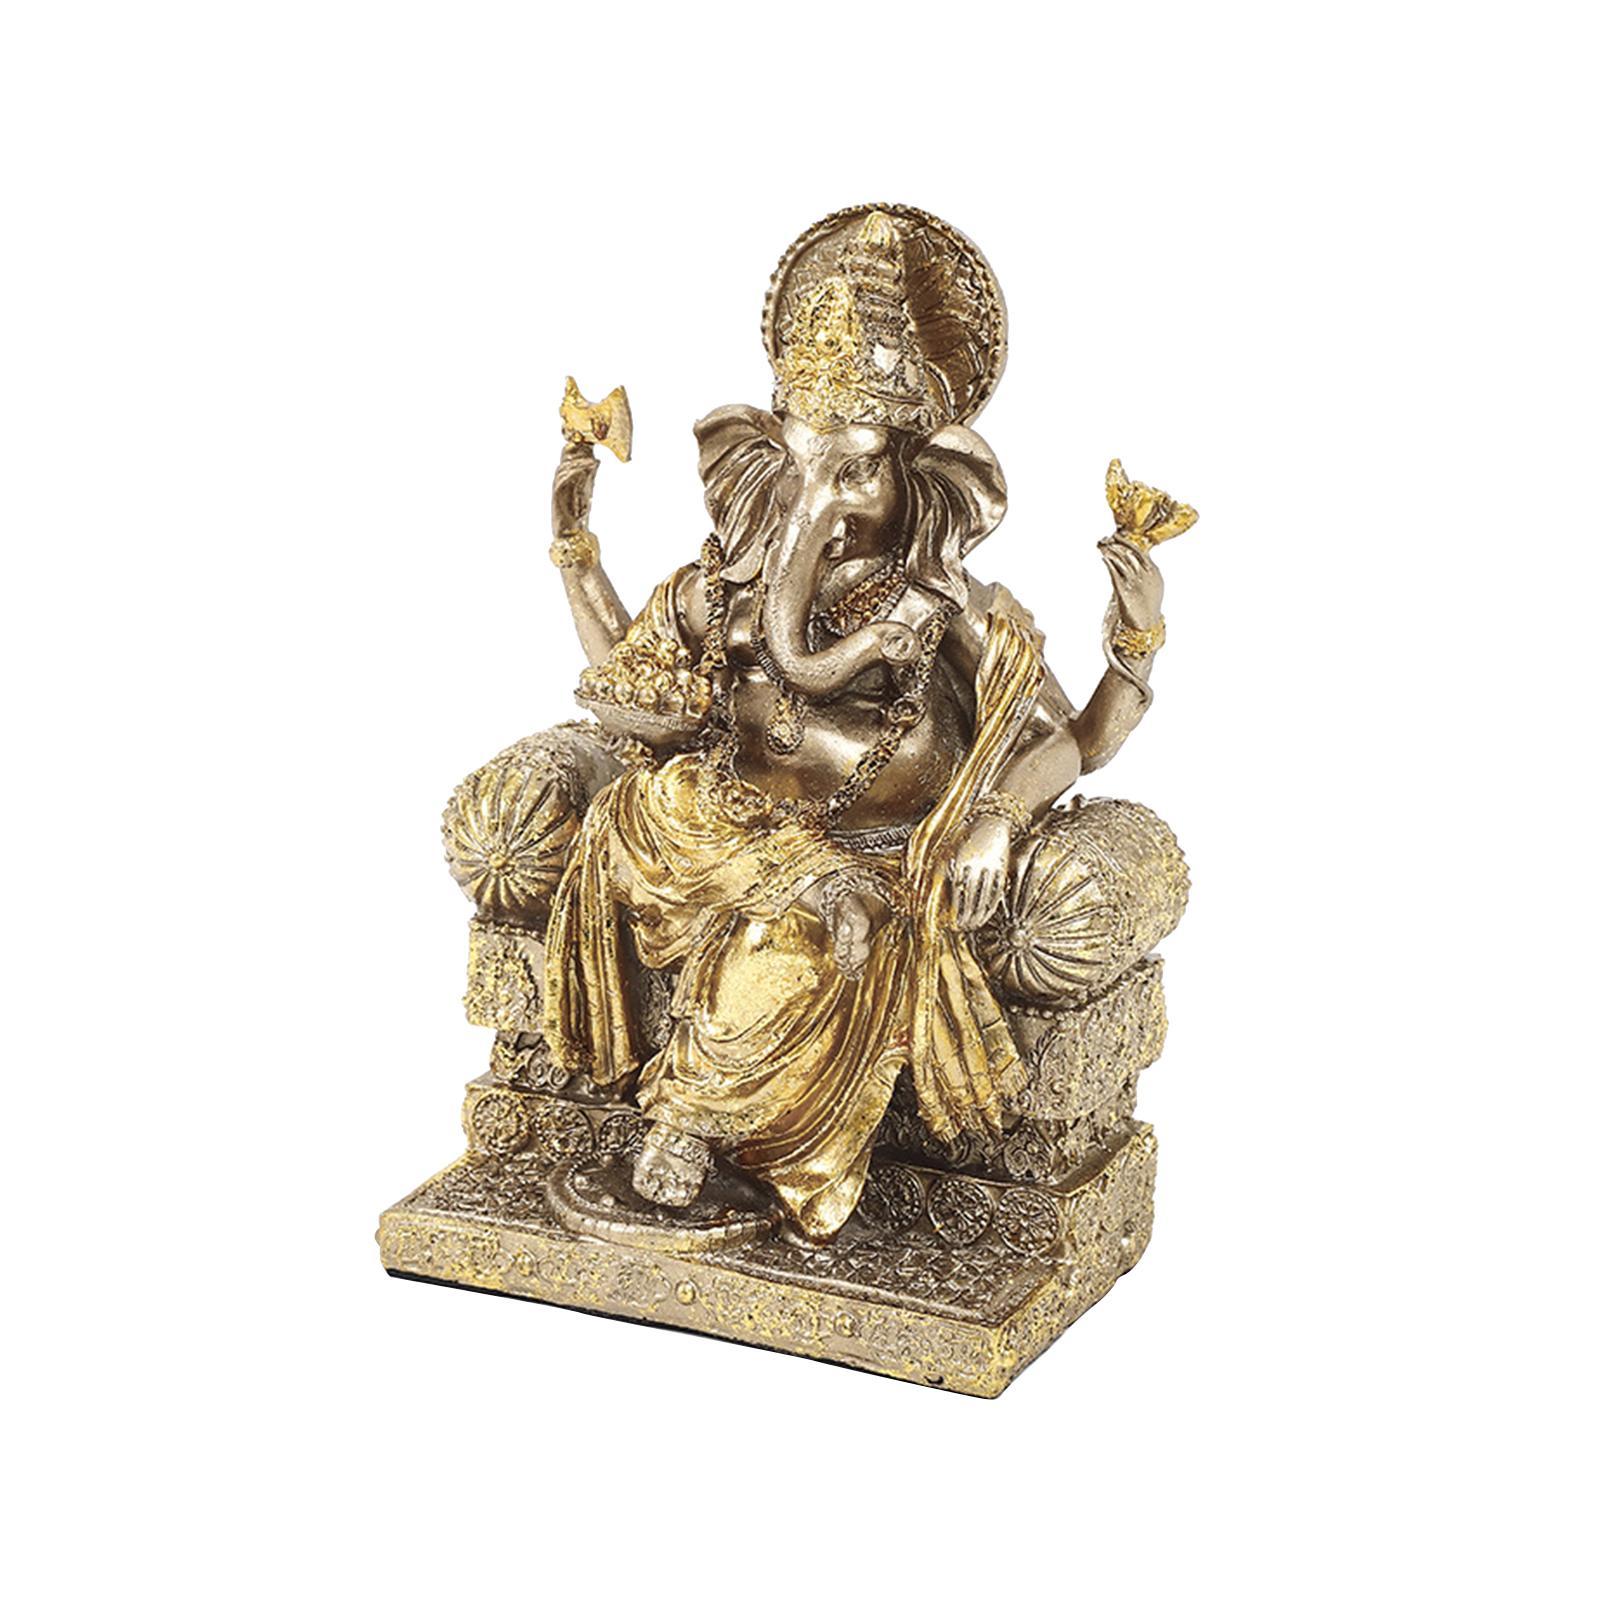 Lord Statues Souvenirs Gifts Figurine for Office Car Ornament